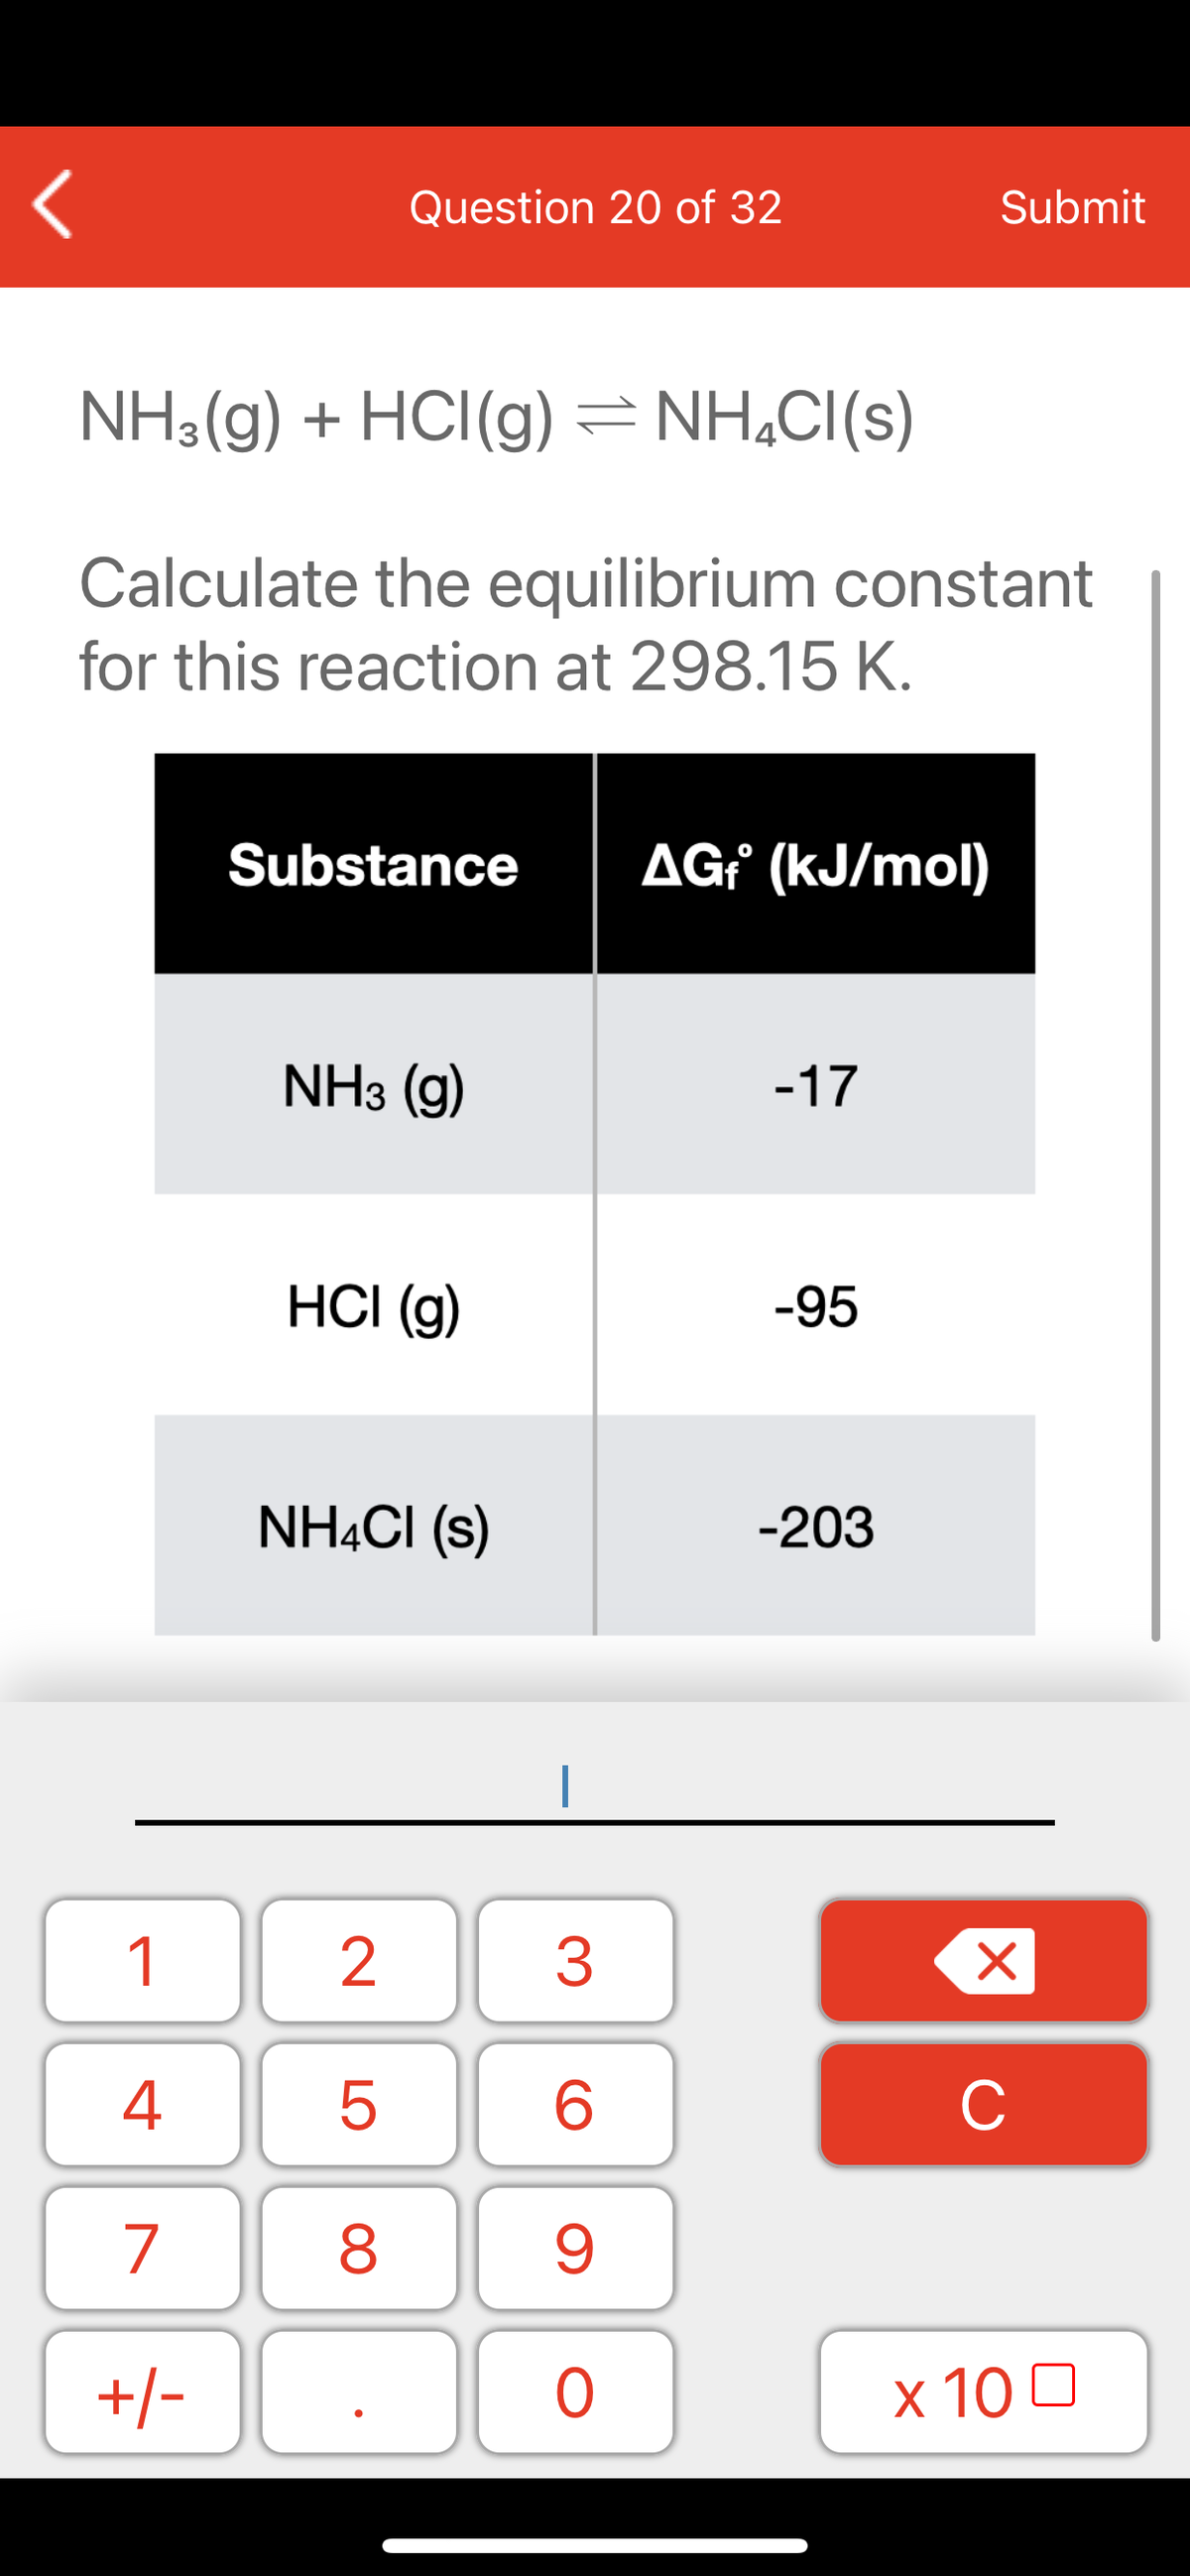 Question 20 of 32
Submit
NH3(g) + HCI(g)
NH,CI(s)
Calculate the equilibrium constant
for this reaction at 298.15 K.
Substance
AG¡ (kJ/mol)
NH3 (g)
-17
HCI (g)
-95
NHẠCI (s)
-203
1
2
3
C
7
9.
+/-
x 10 0
LO
00
